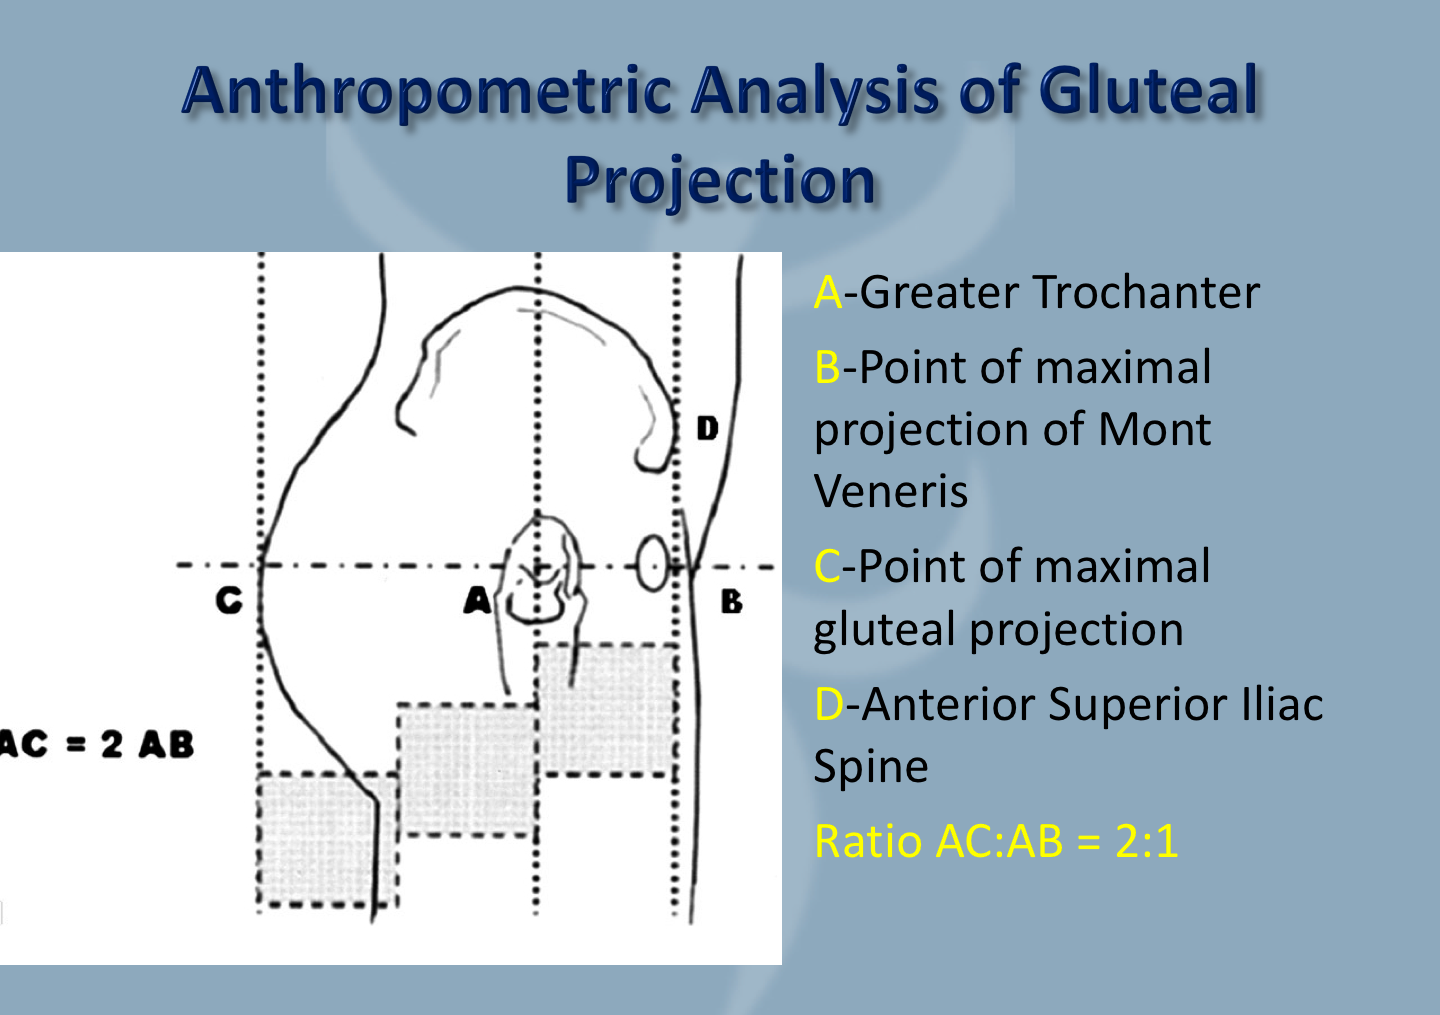 Ratio and gluteal projection for white caucasian females